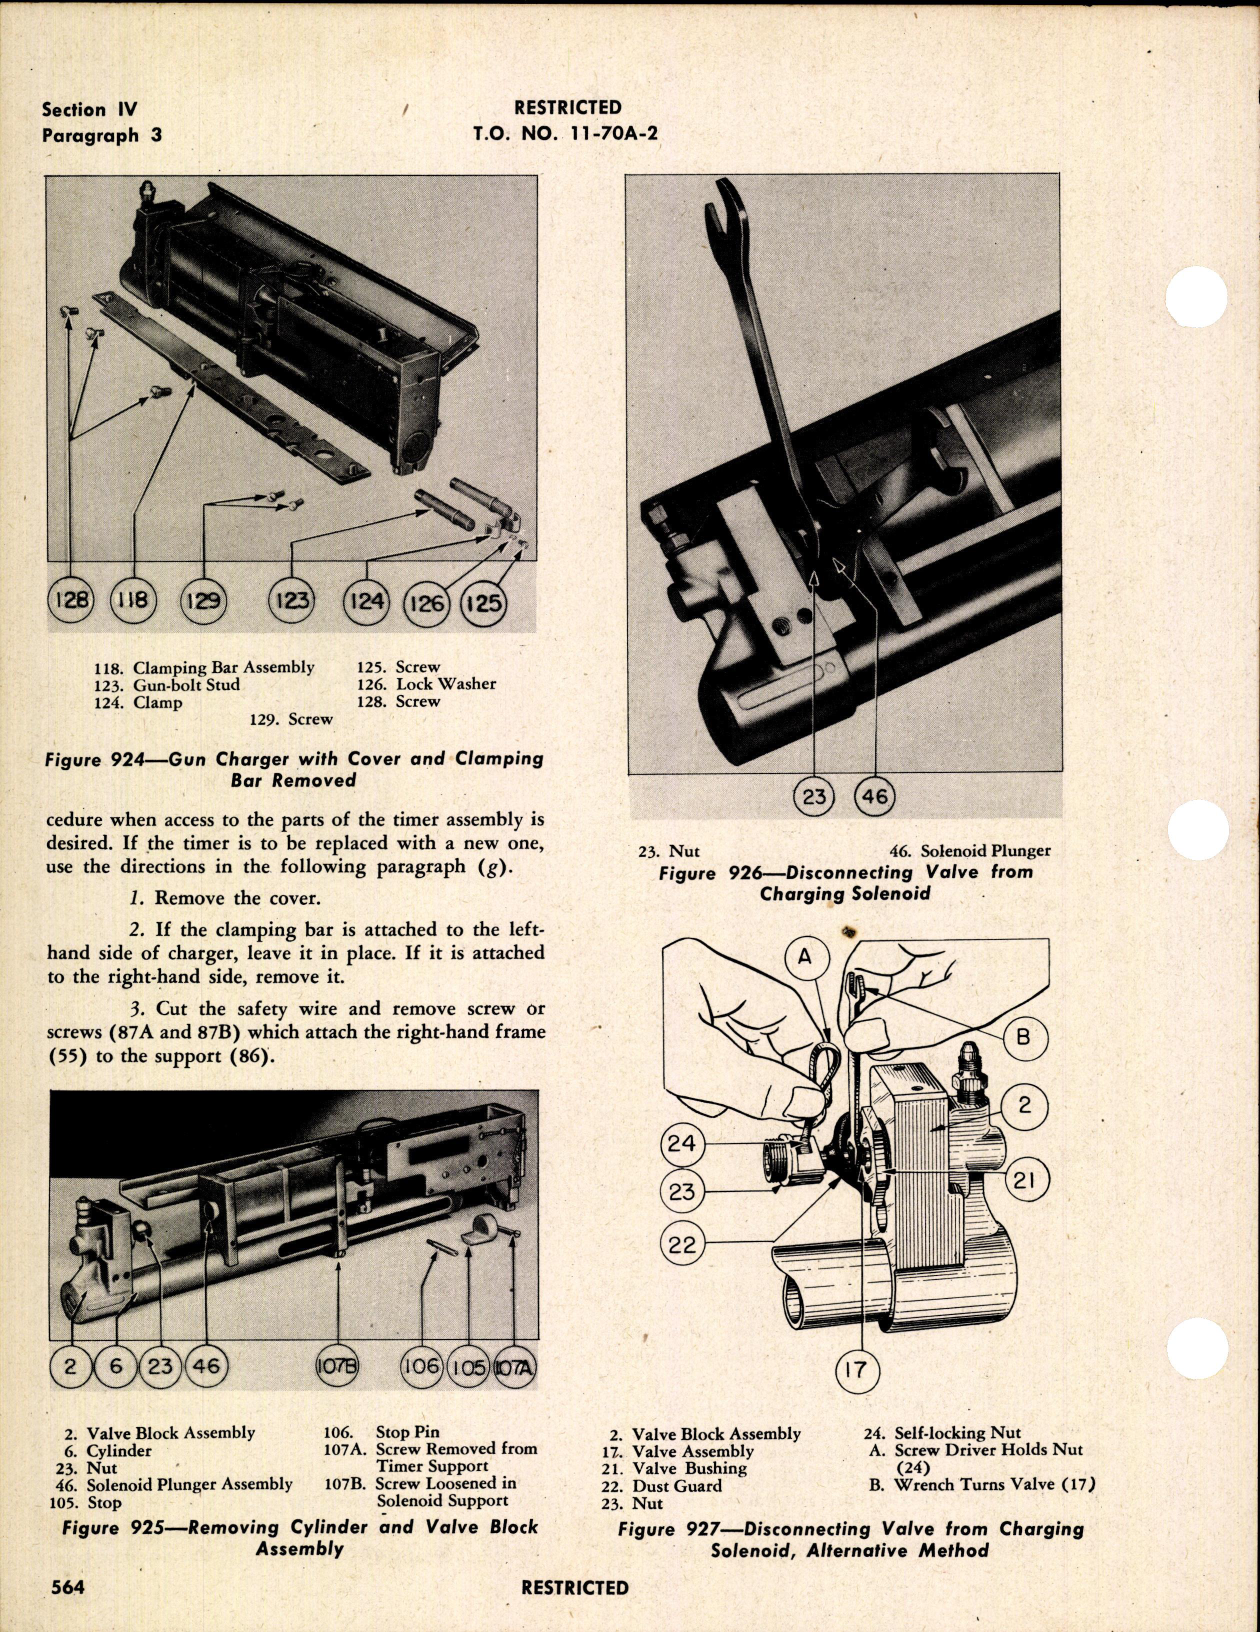 Sample page 4 from AirCorps Library document: Instructions for Remote Control Turrets (Pg 561-920)